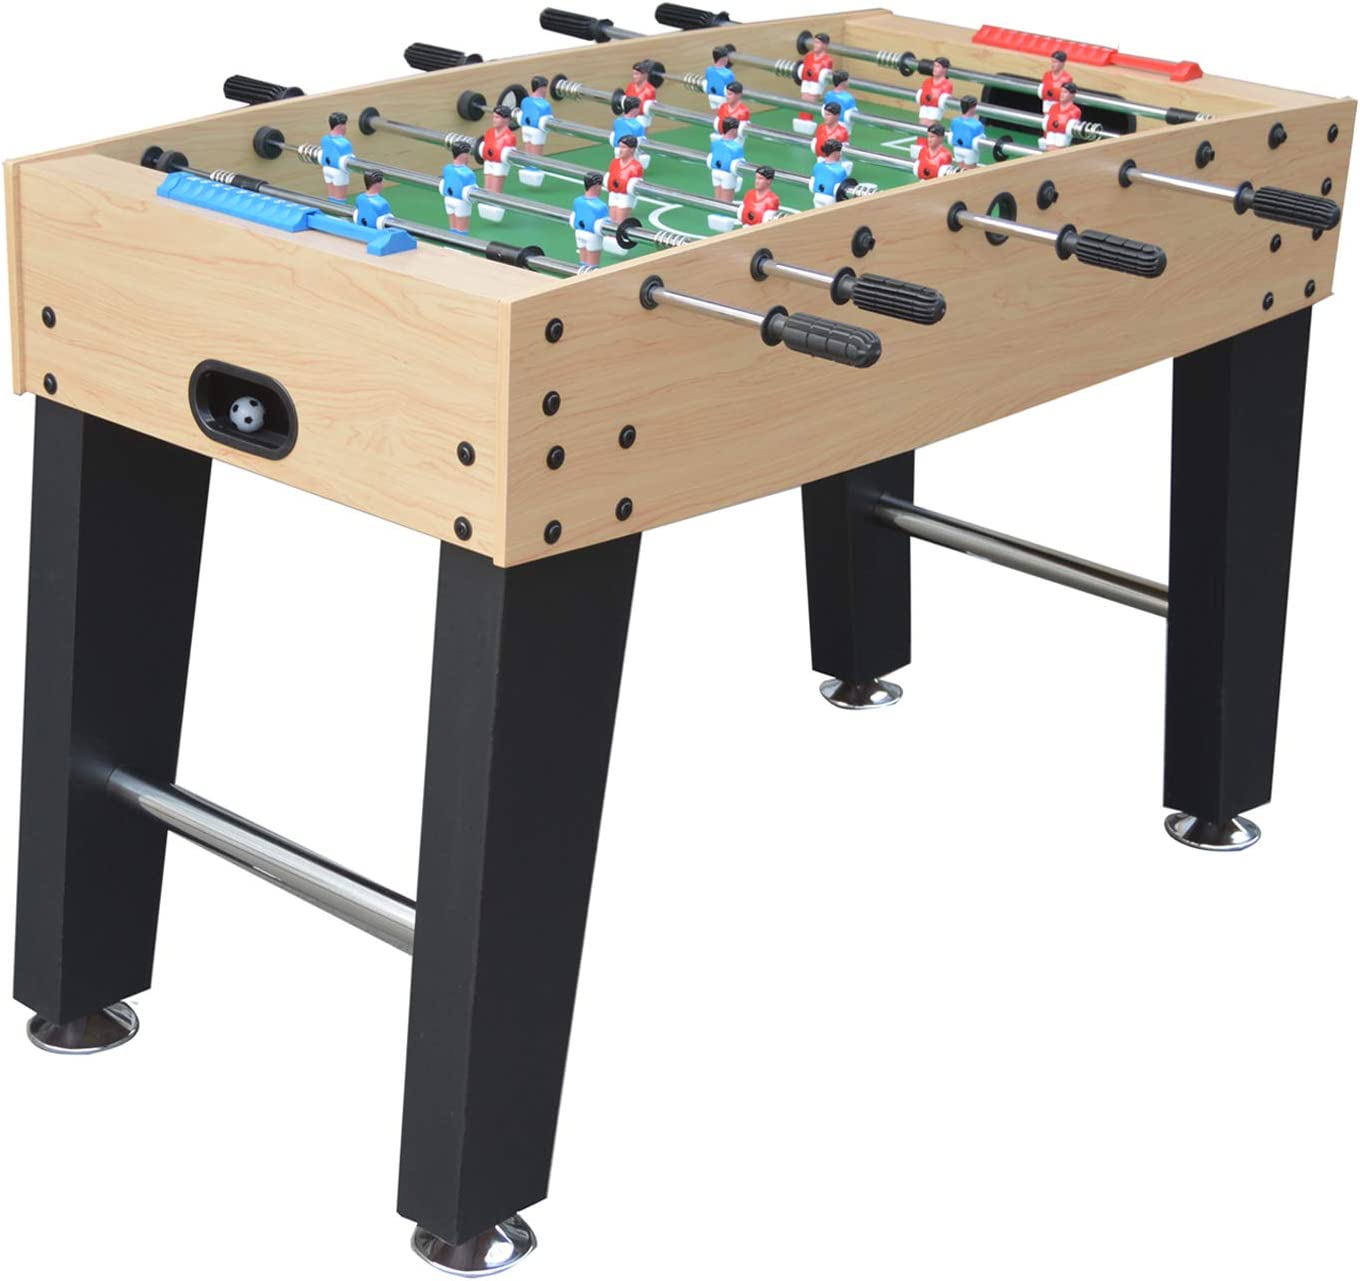 Hathaway Metropolis Competition Telescopic Safety Handles and Maple Design, Arcade Soccer for Game Rooms 48-in Foosball Table